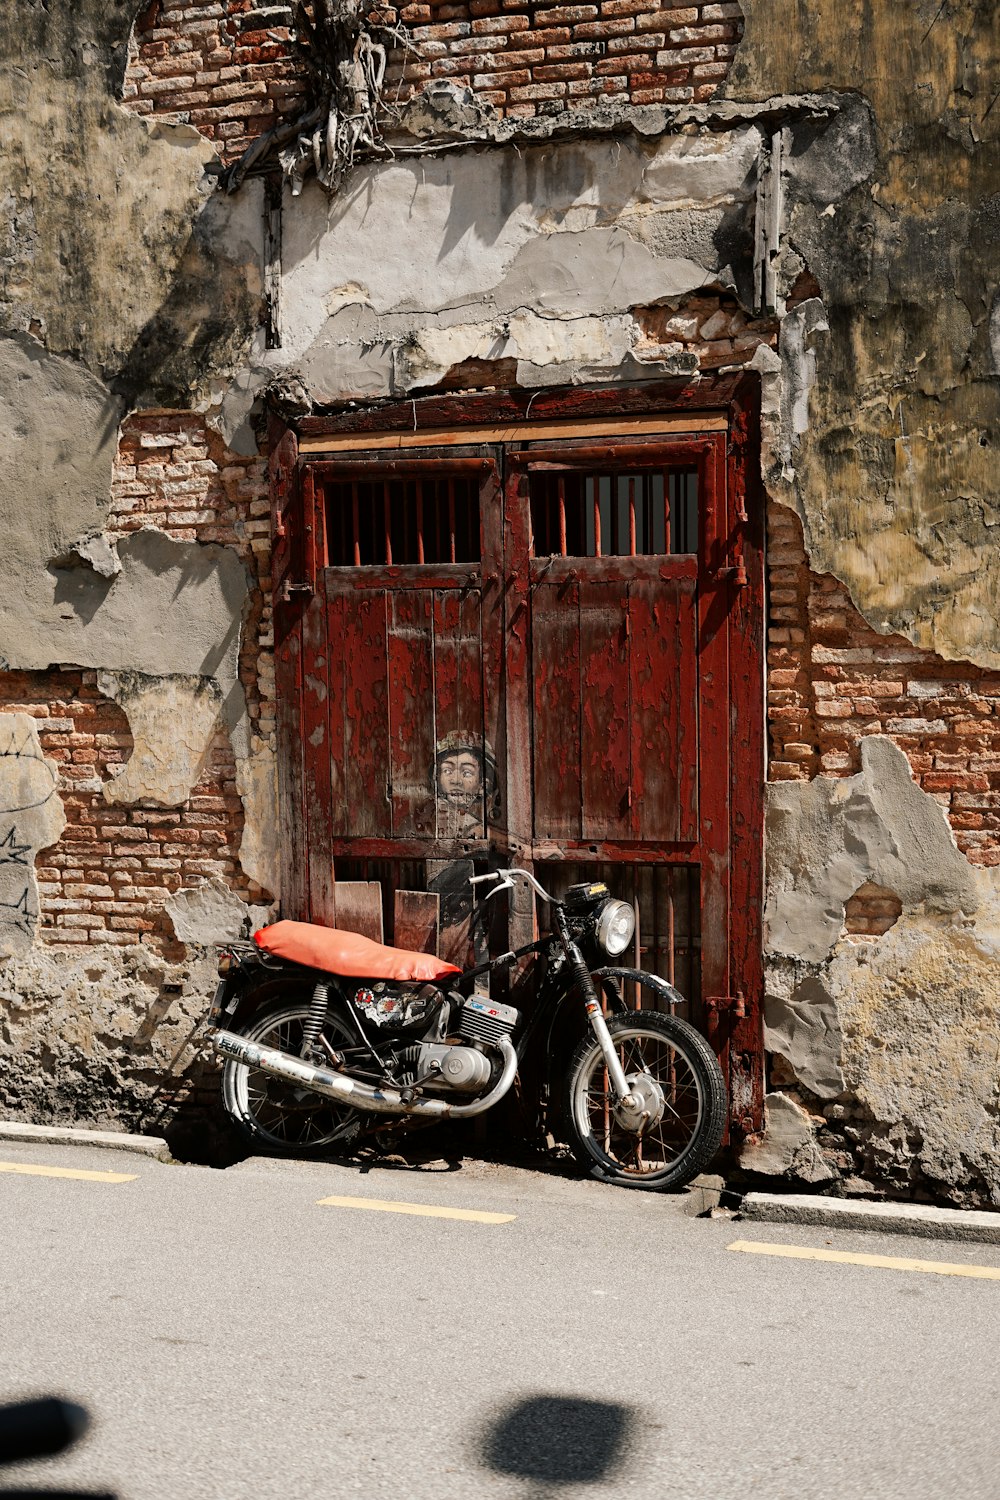 a motorcycle parked in front of an old building